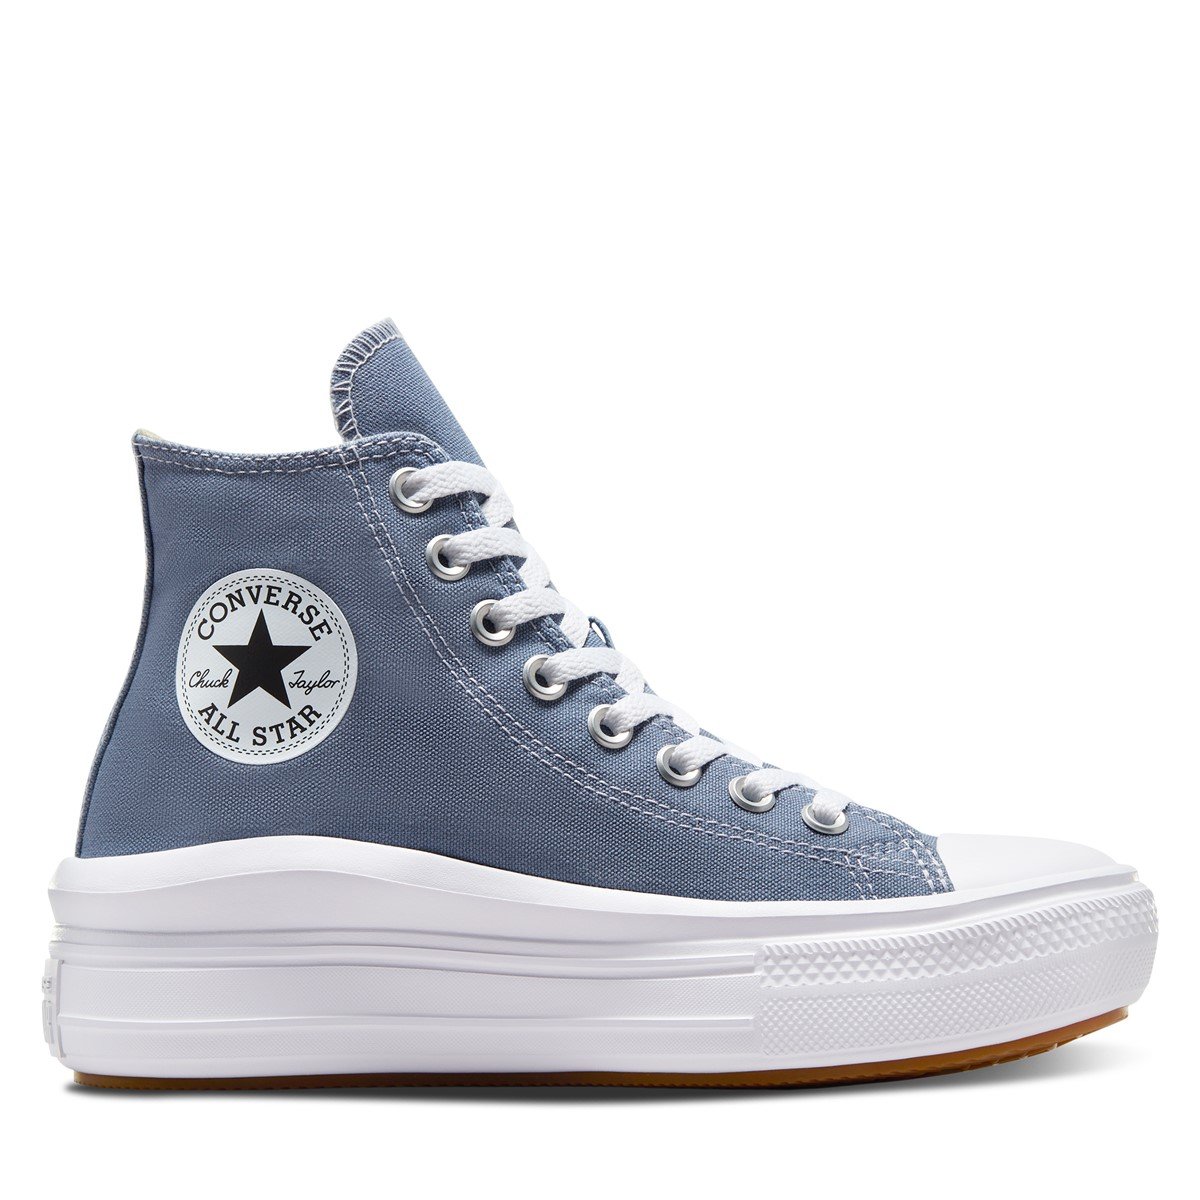 Women's Chuck Taylor All Star Move Hi Sneakers in Grey Blue